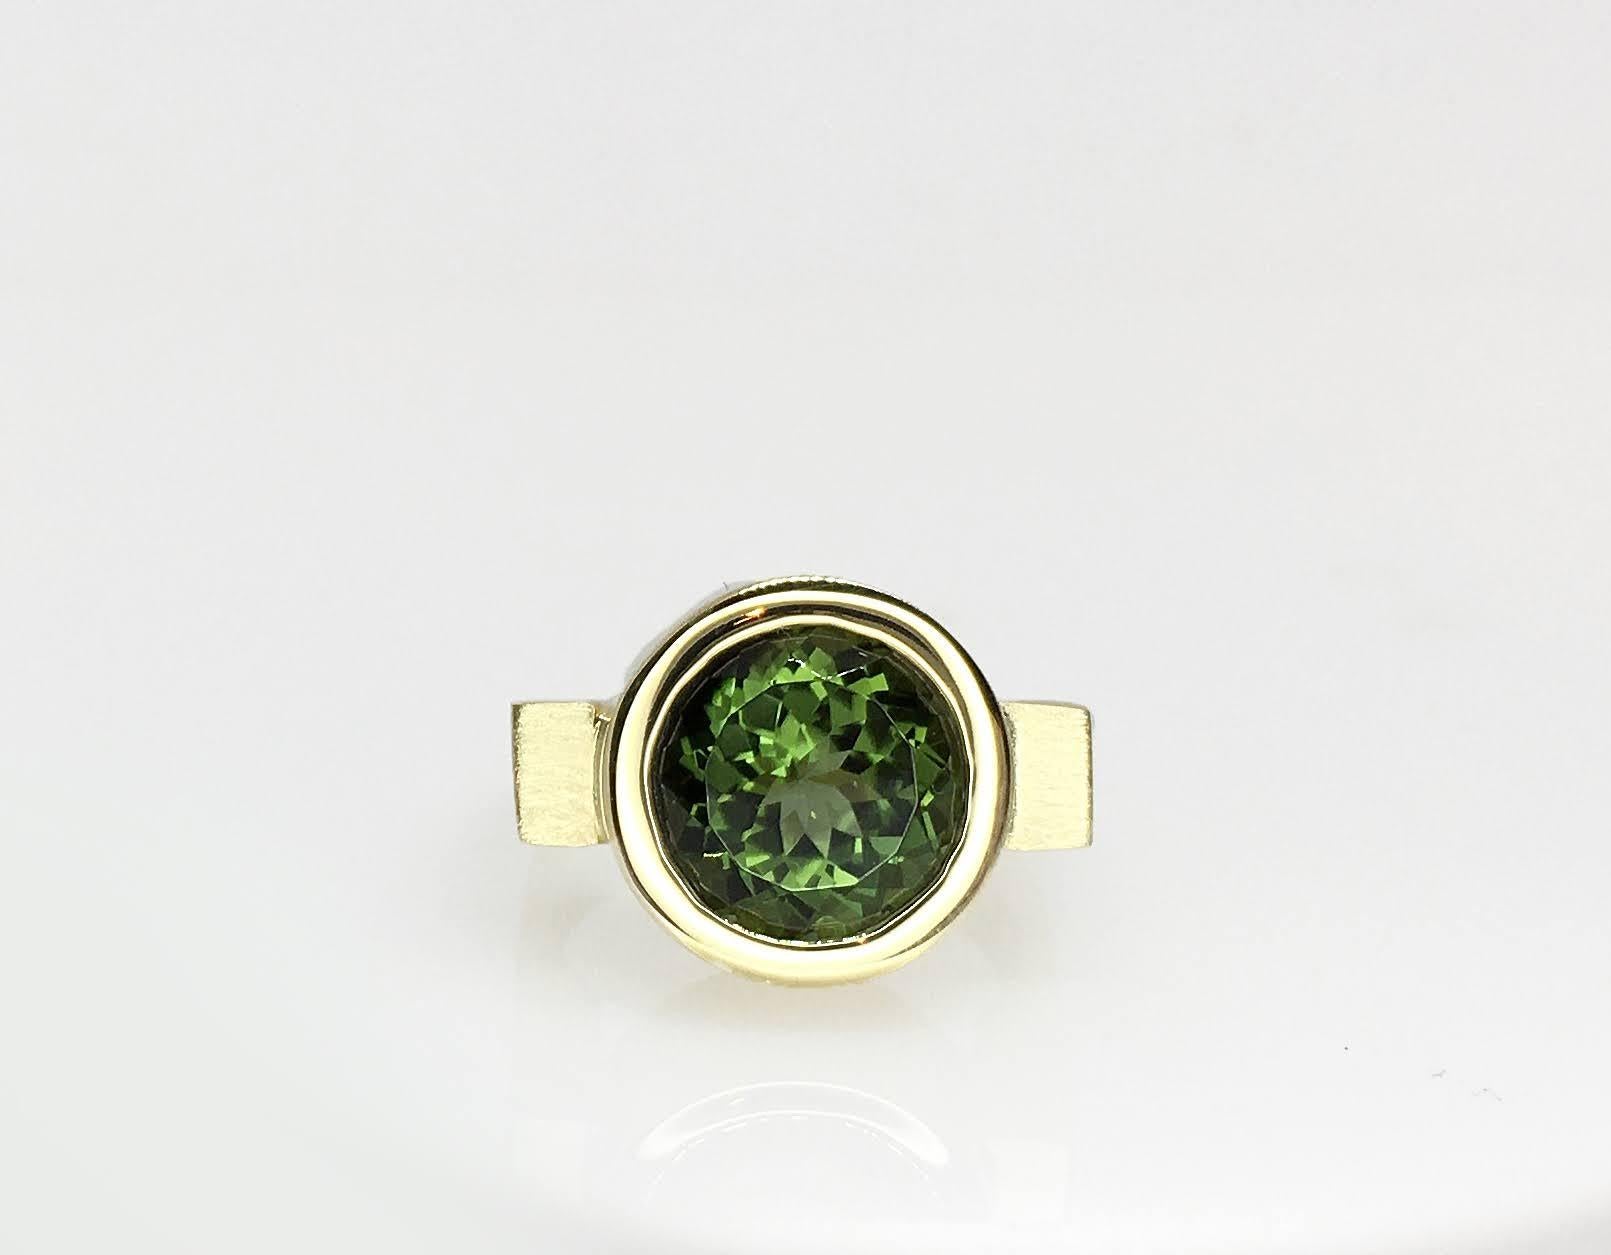 This Green Tourmaline Bezel Ring is shown here in yellow gold. A round bezel set on a squared band with a high polish finish creates an infinitely modern look. Be careful, this ring will bring you much attention, if that’s what you’re aiming for,